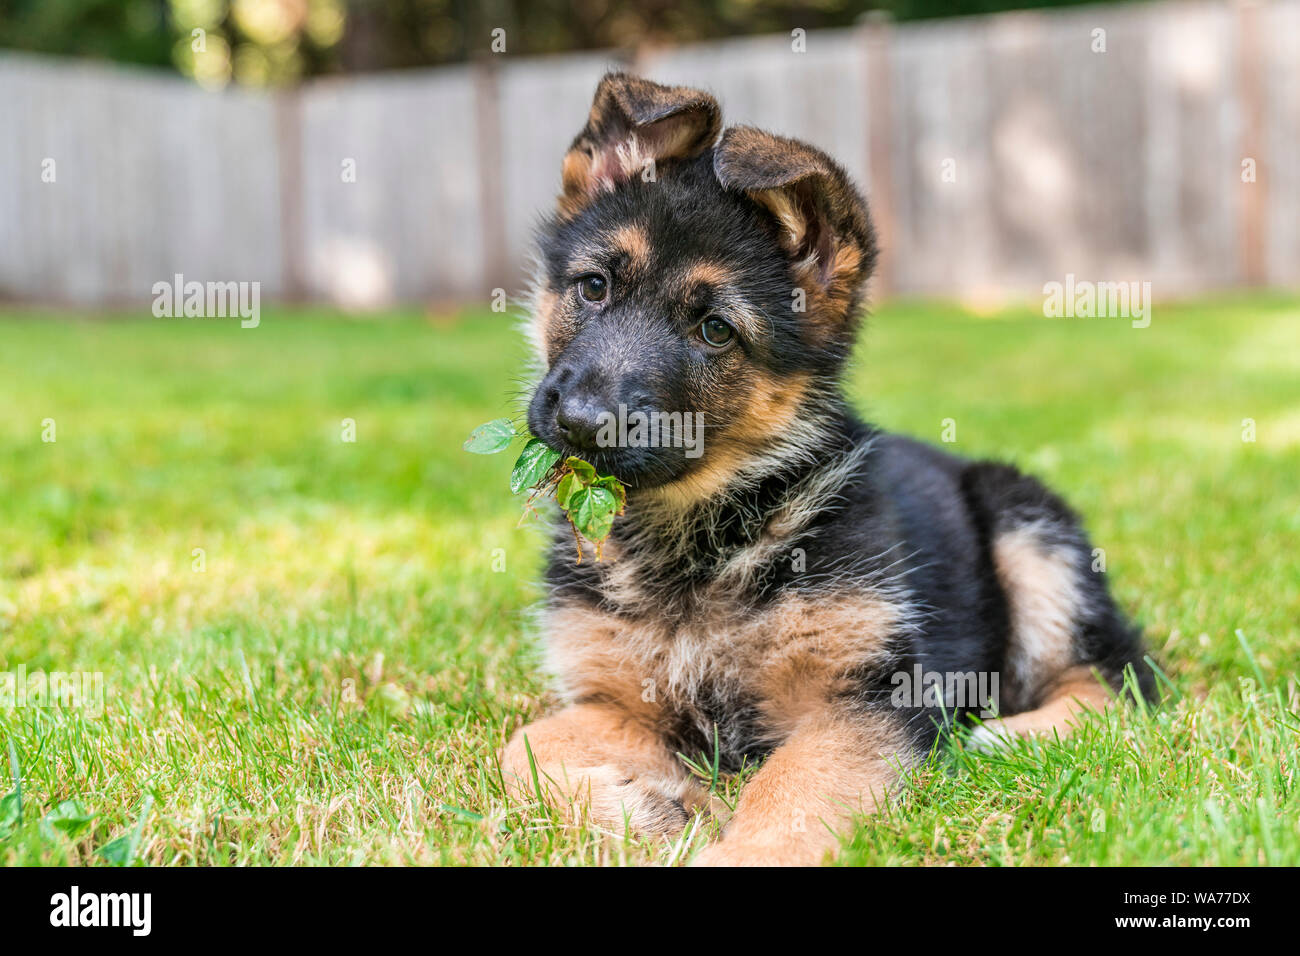 Young German Shepherd Puppy lying on grass with her head tilted, floppy ears, and leaves in her mouth. Stock Photo